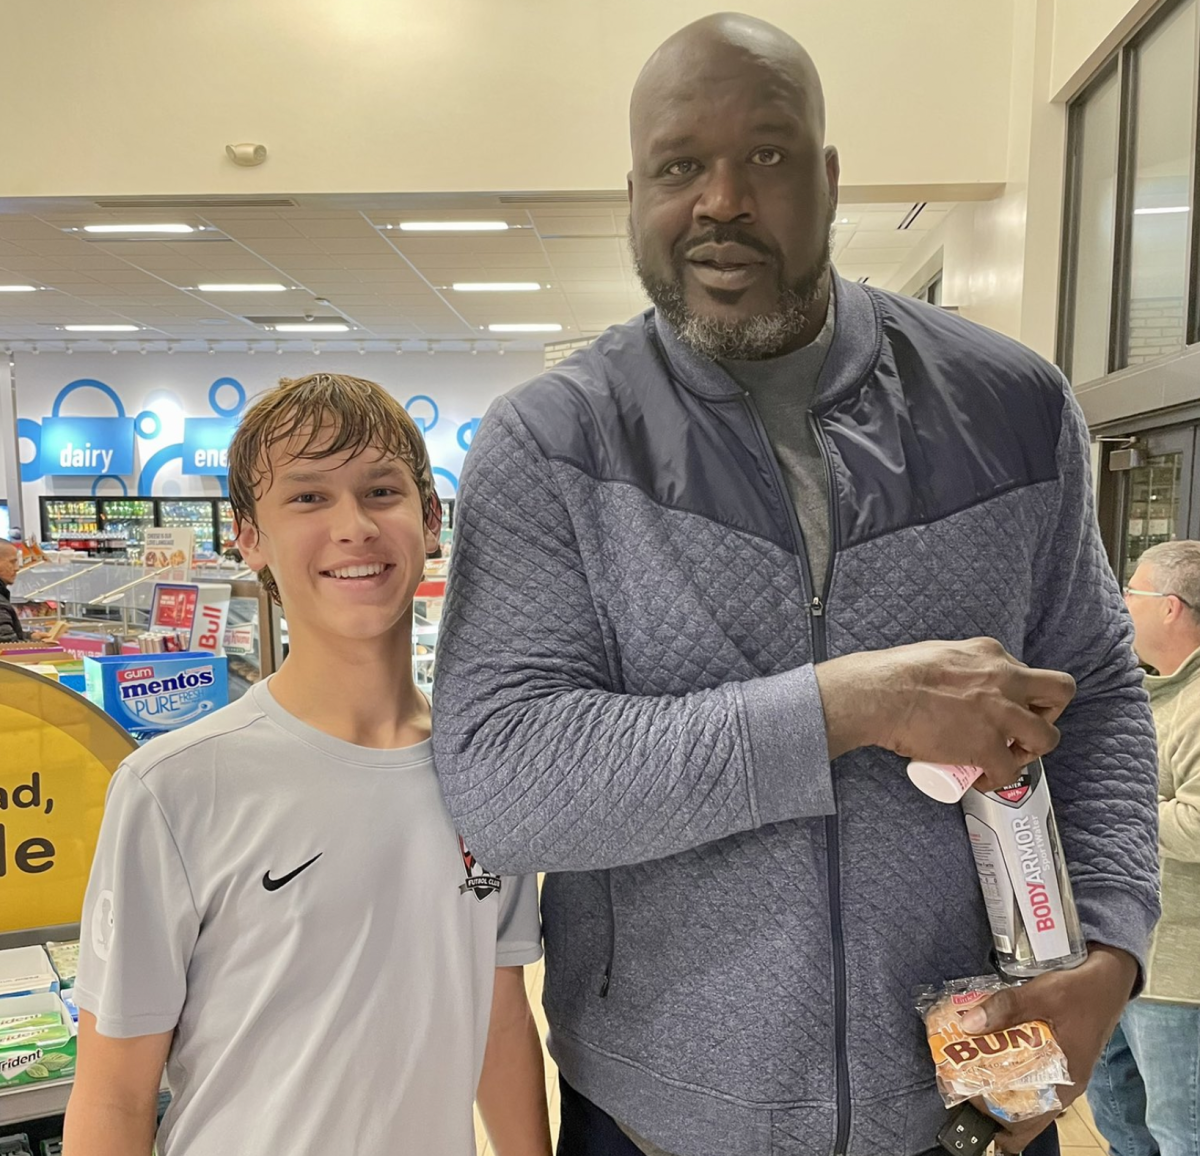 Inside The NBA Crew Roast Shaquille O'Neal For Buying Honey Buns And Pepto-Bismol: "Took Us Completely By Surprise"